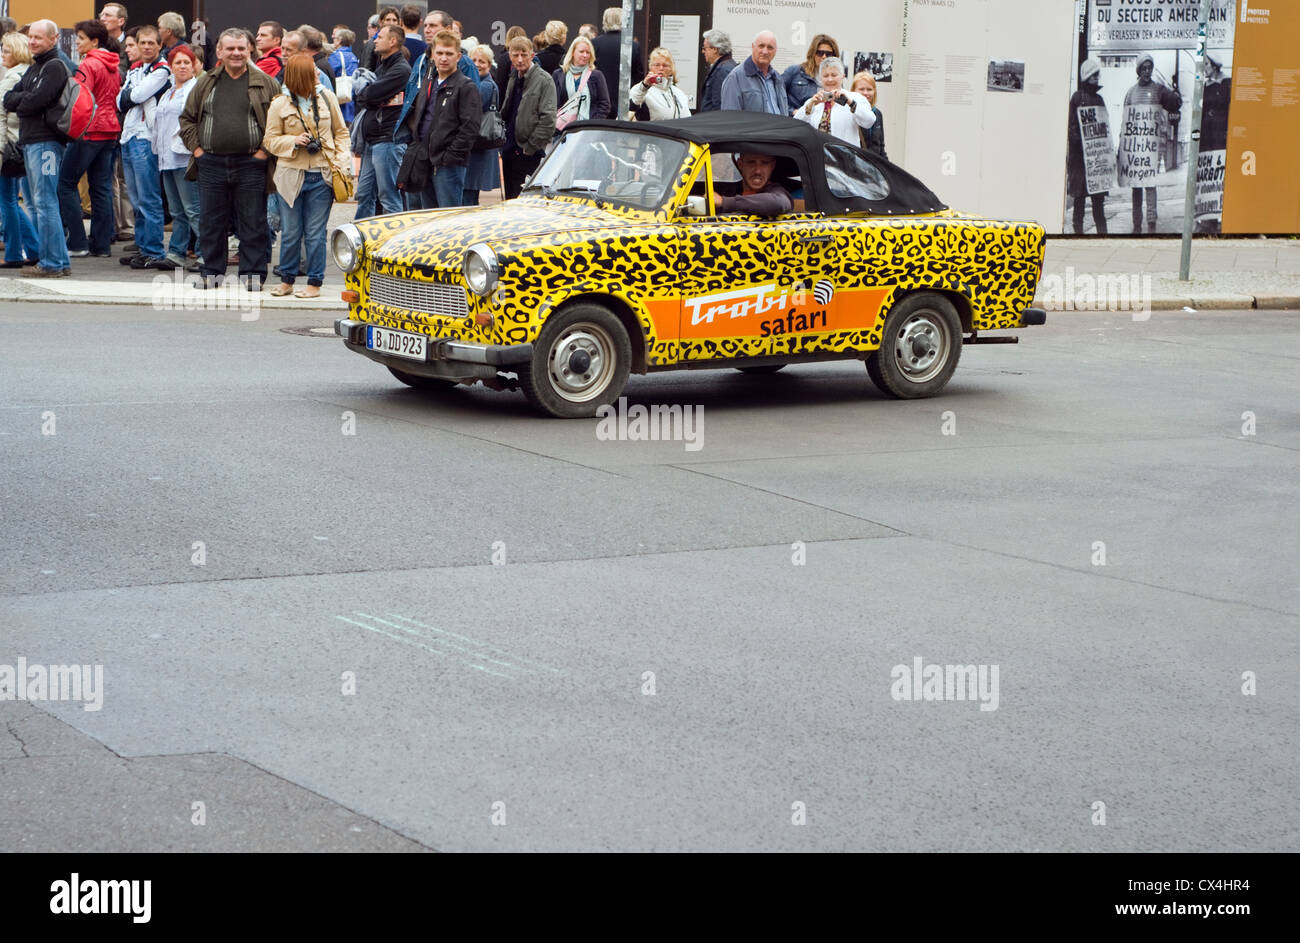 A Trabant car driving on the streets in Berlin, Germany Stock Photo